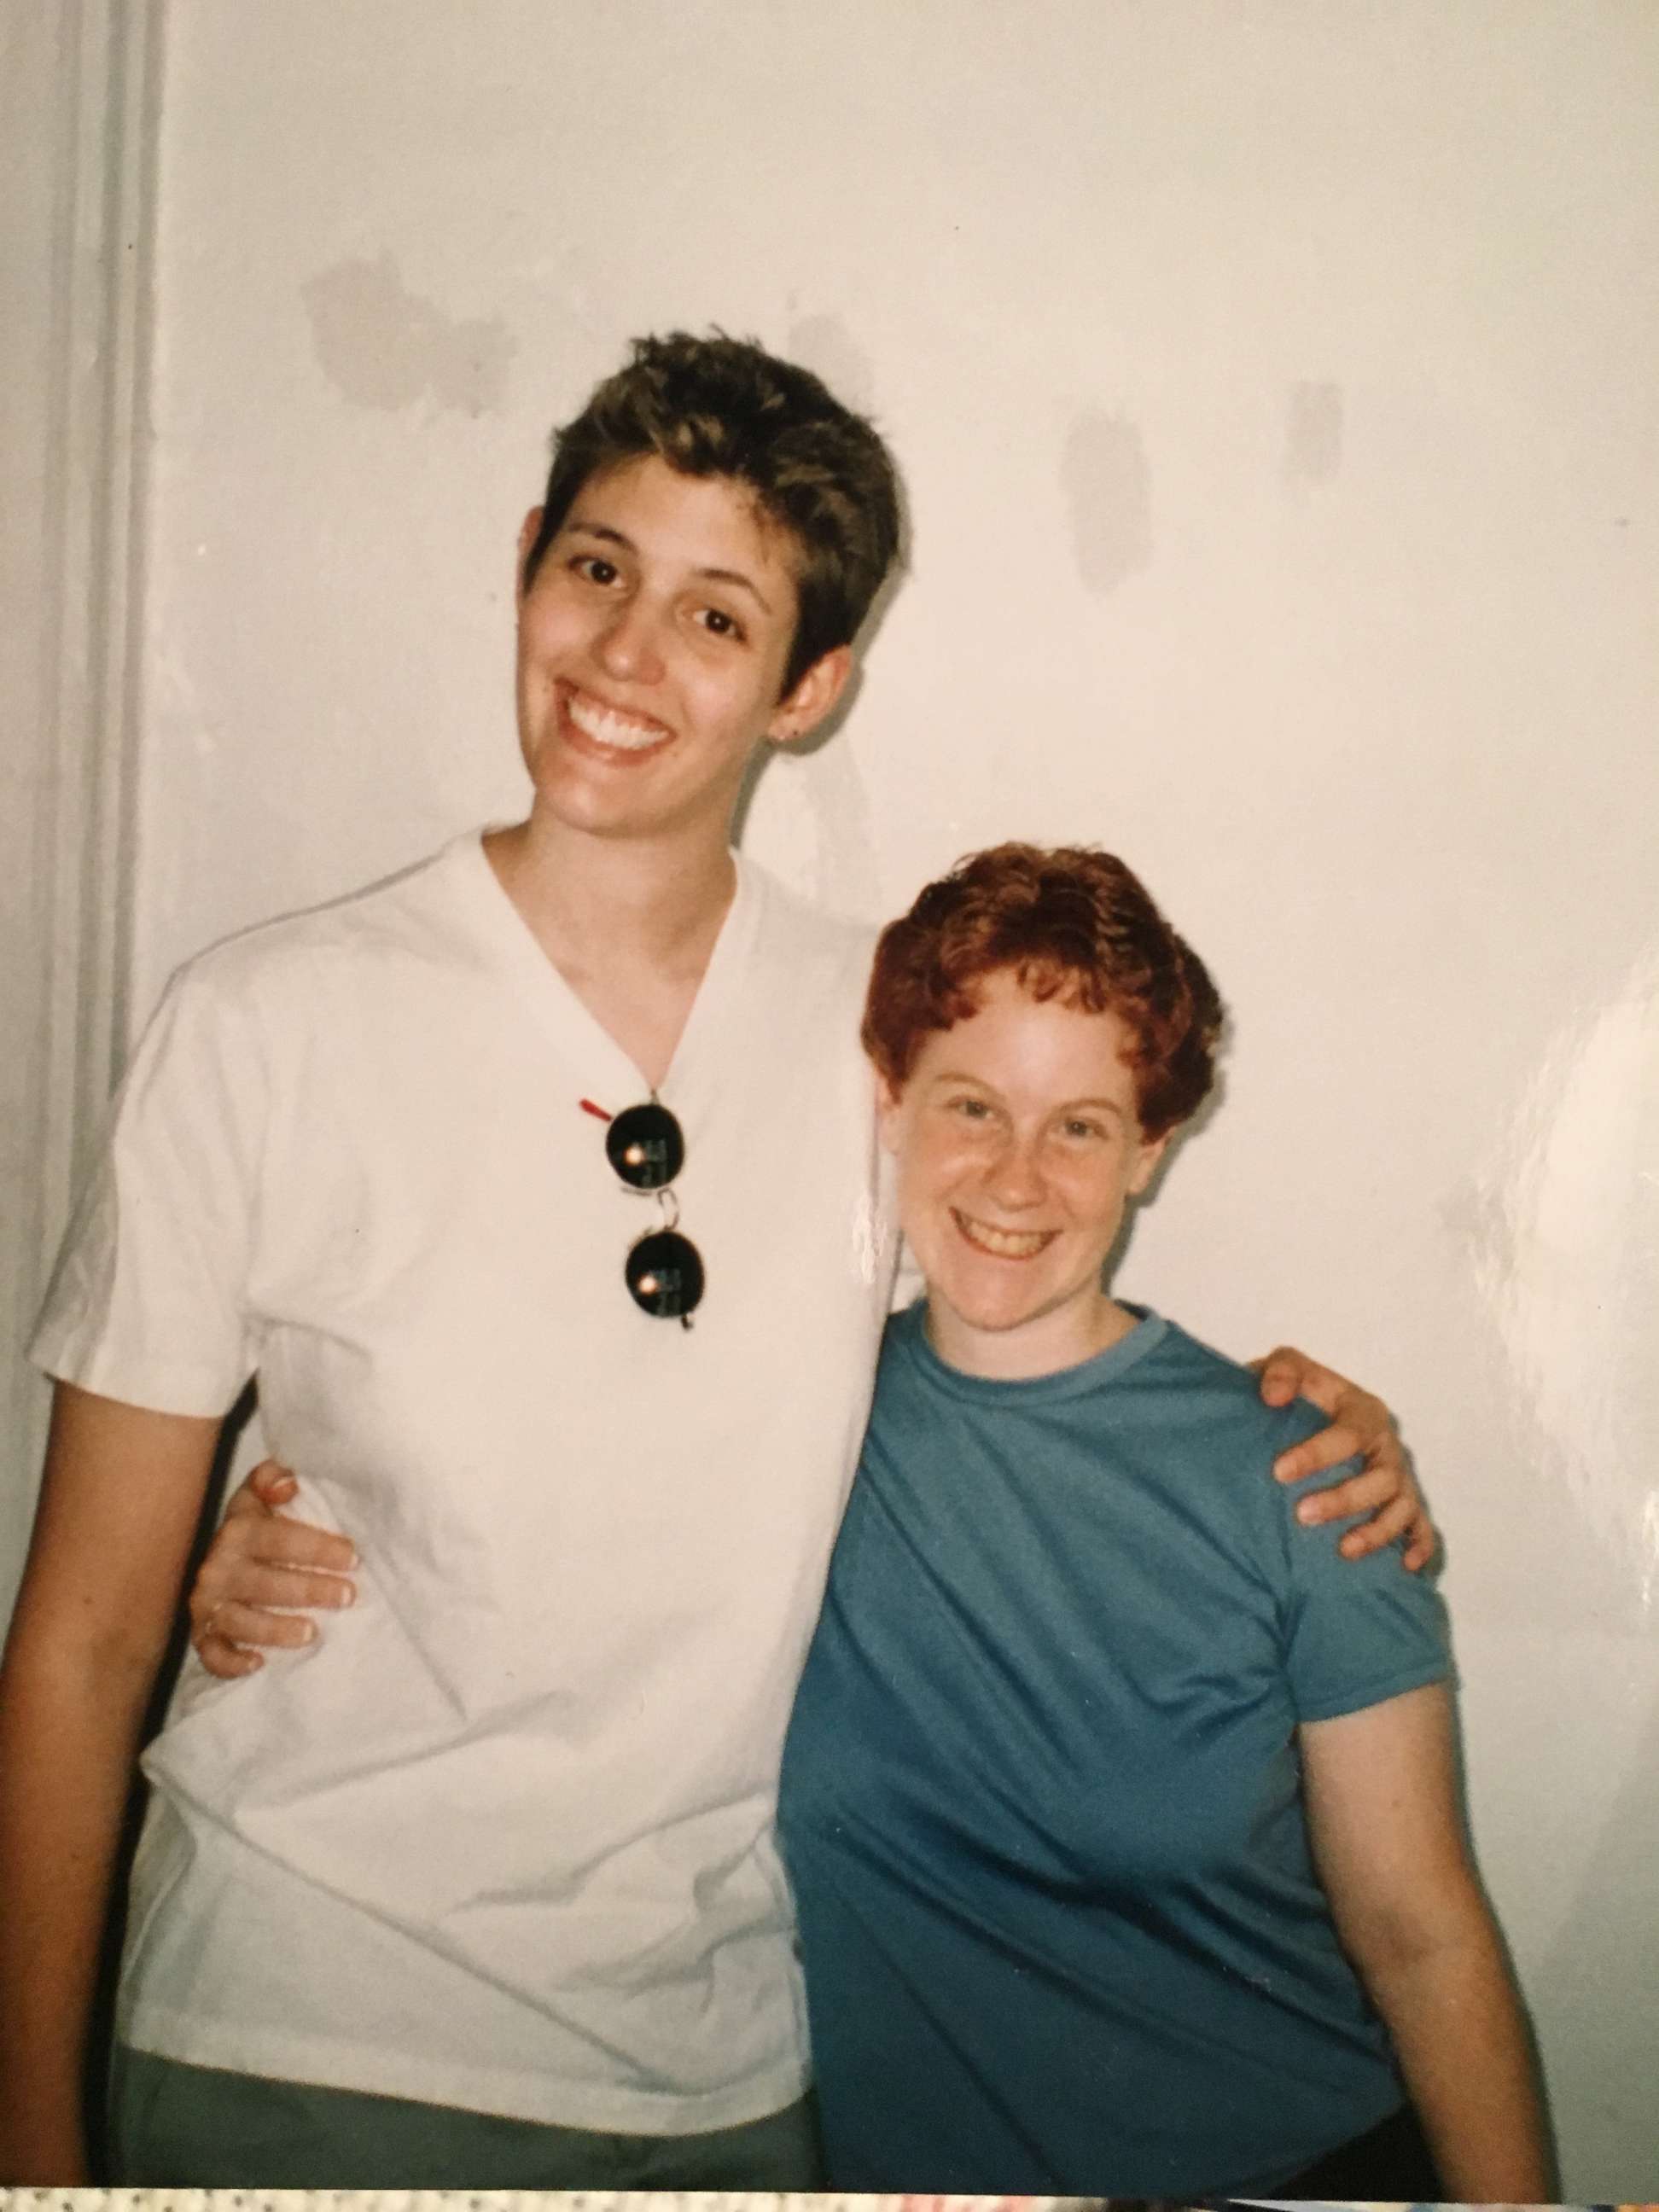 PHOTO: Sally Kohn is pictured in this undated photo from her early 20s with her high school sweetheart.